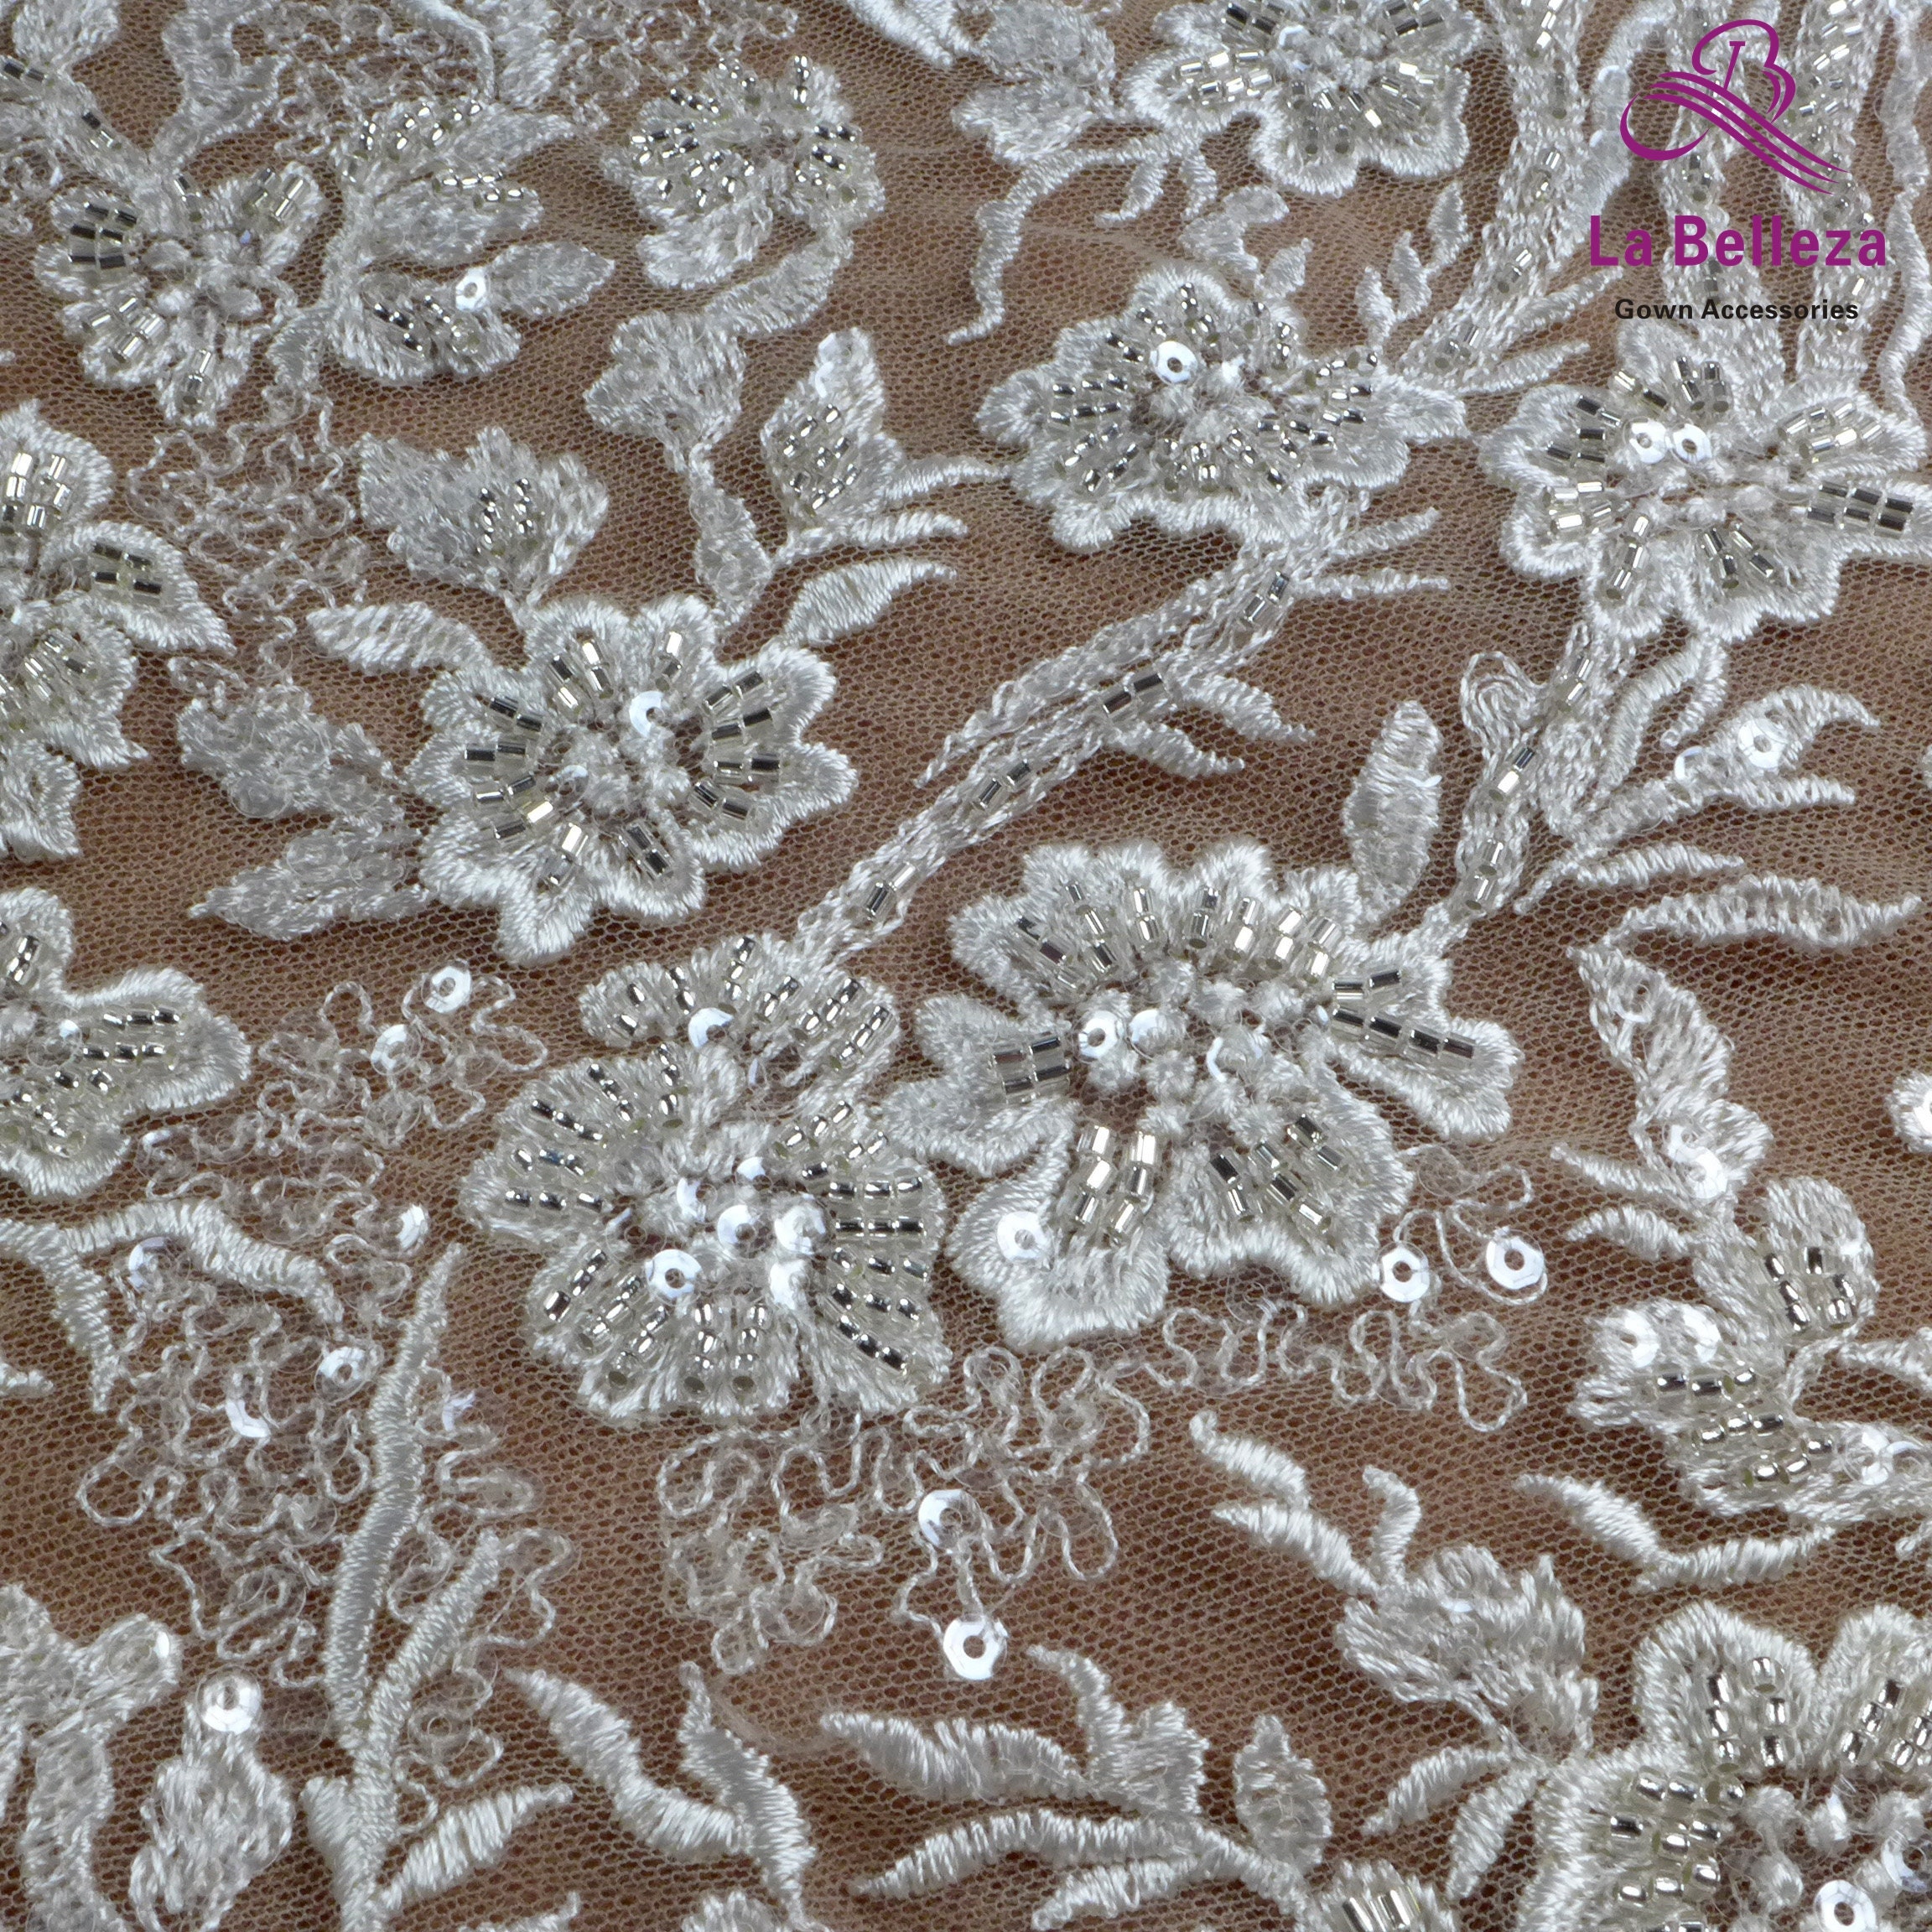 Delicate Leaf Fine Guipure Lace Trim Embroidered Leaf Tulle -  Norway